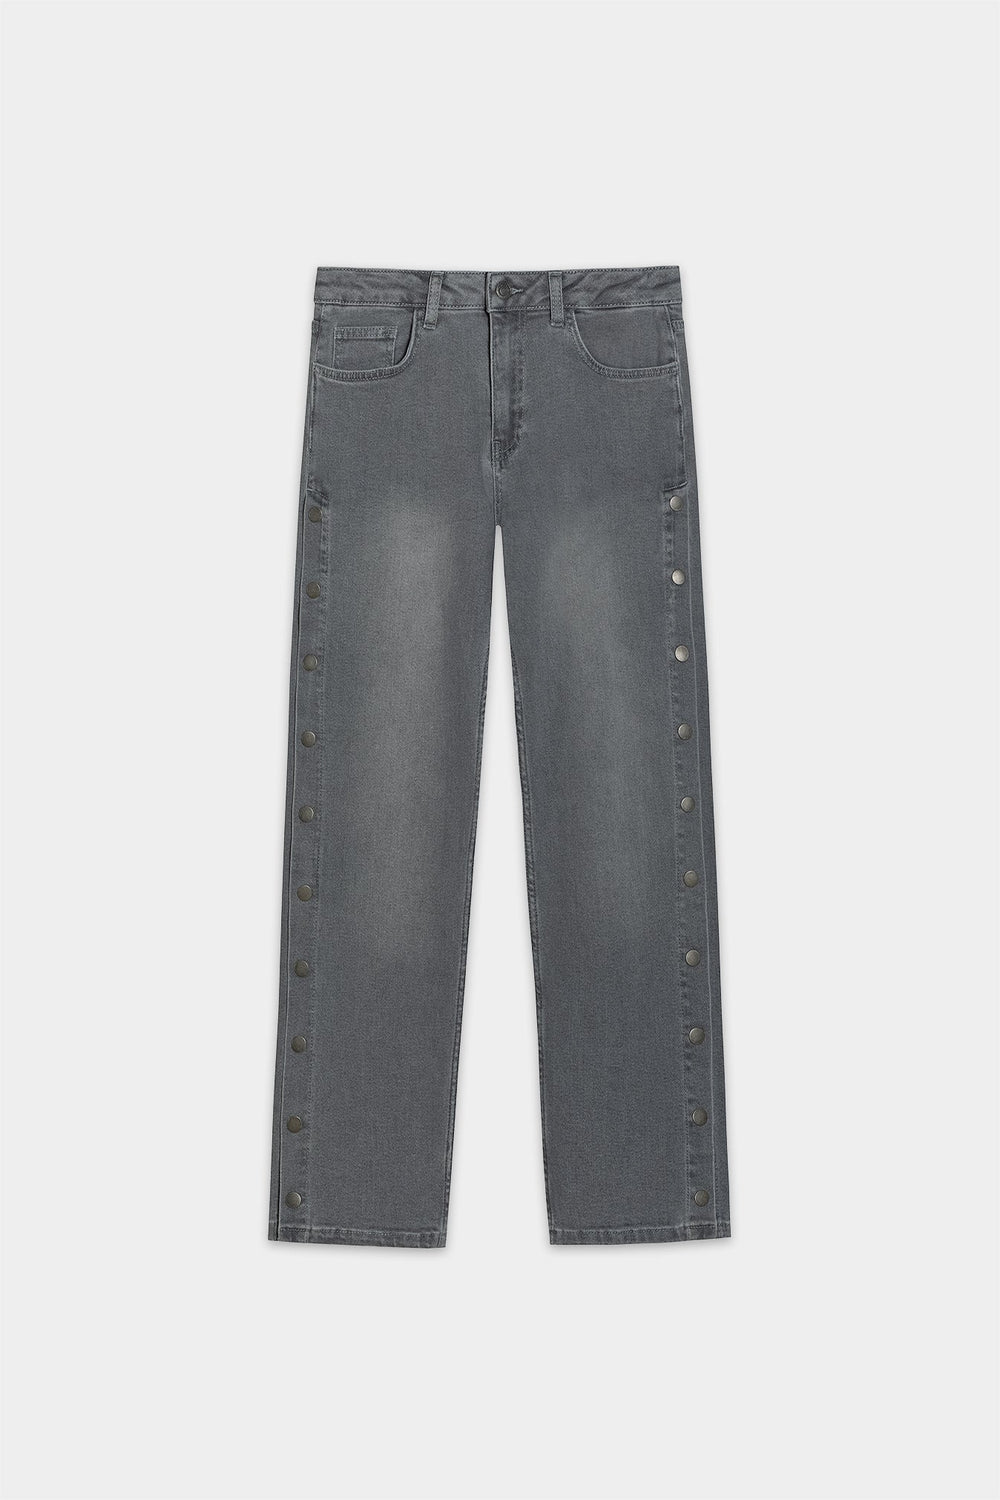 SIDE BUTTON JEANS